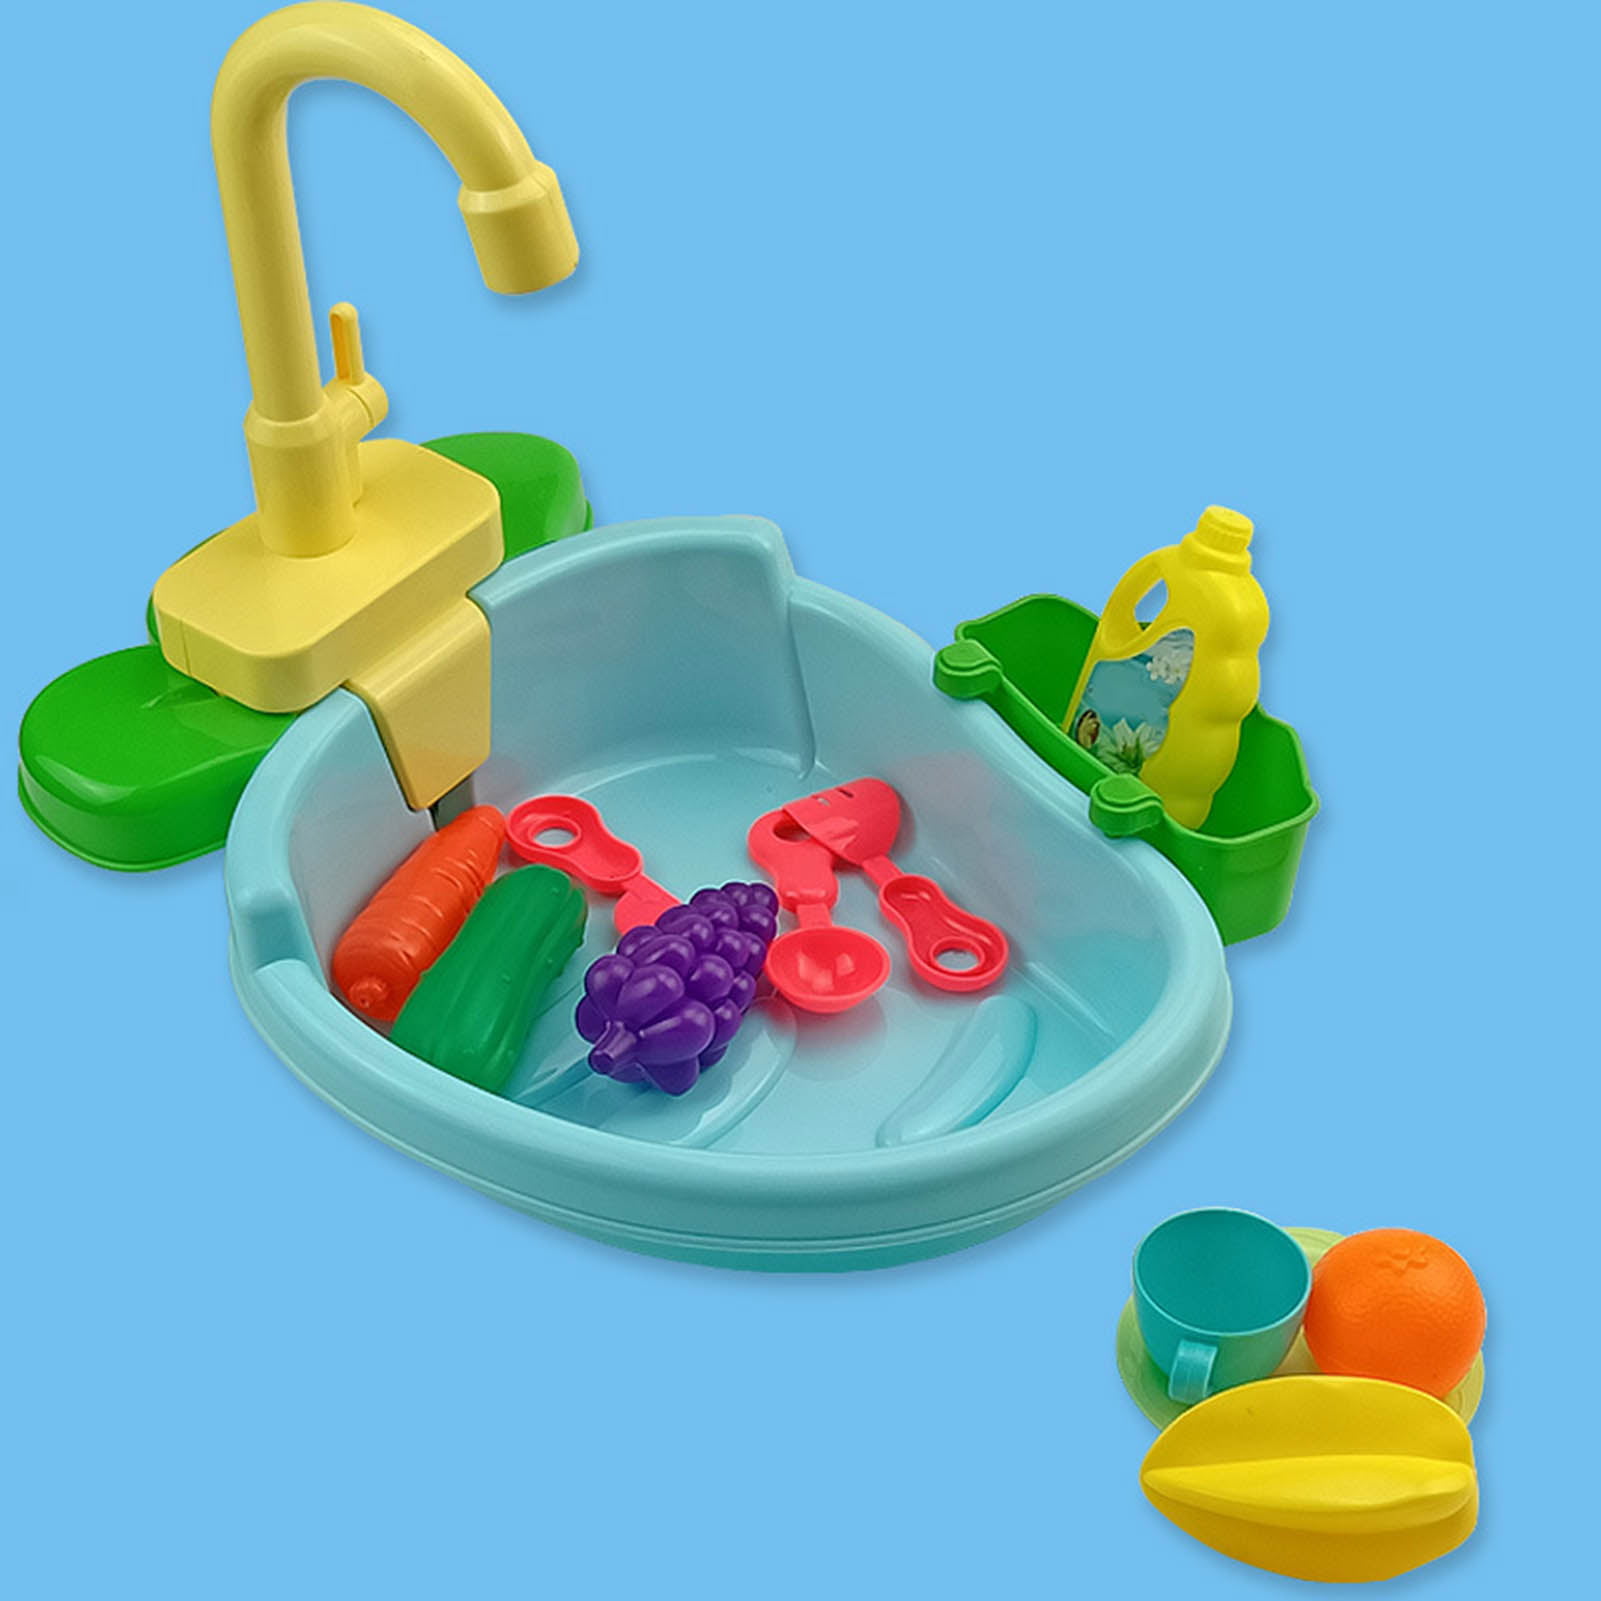 Aofa Kitchen Play Sink Toy - Play Sink - Pretend Play Kitchen Toys for